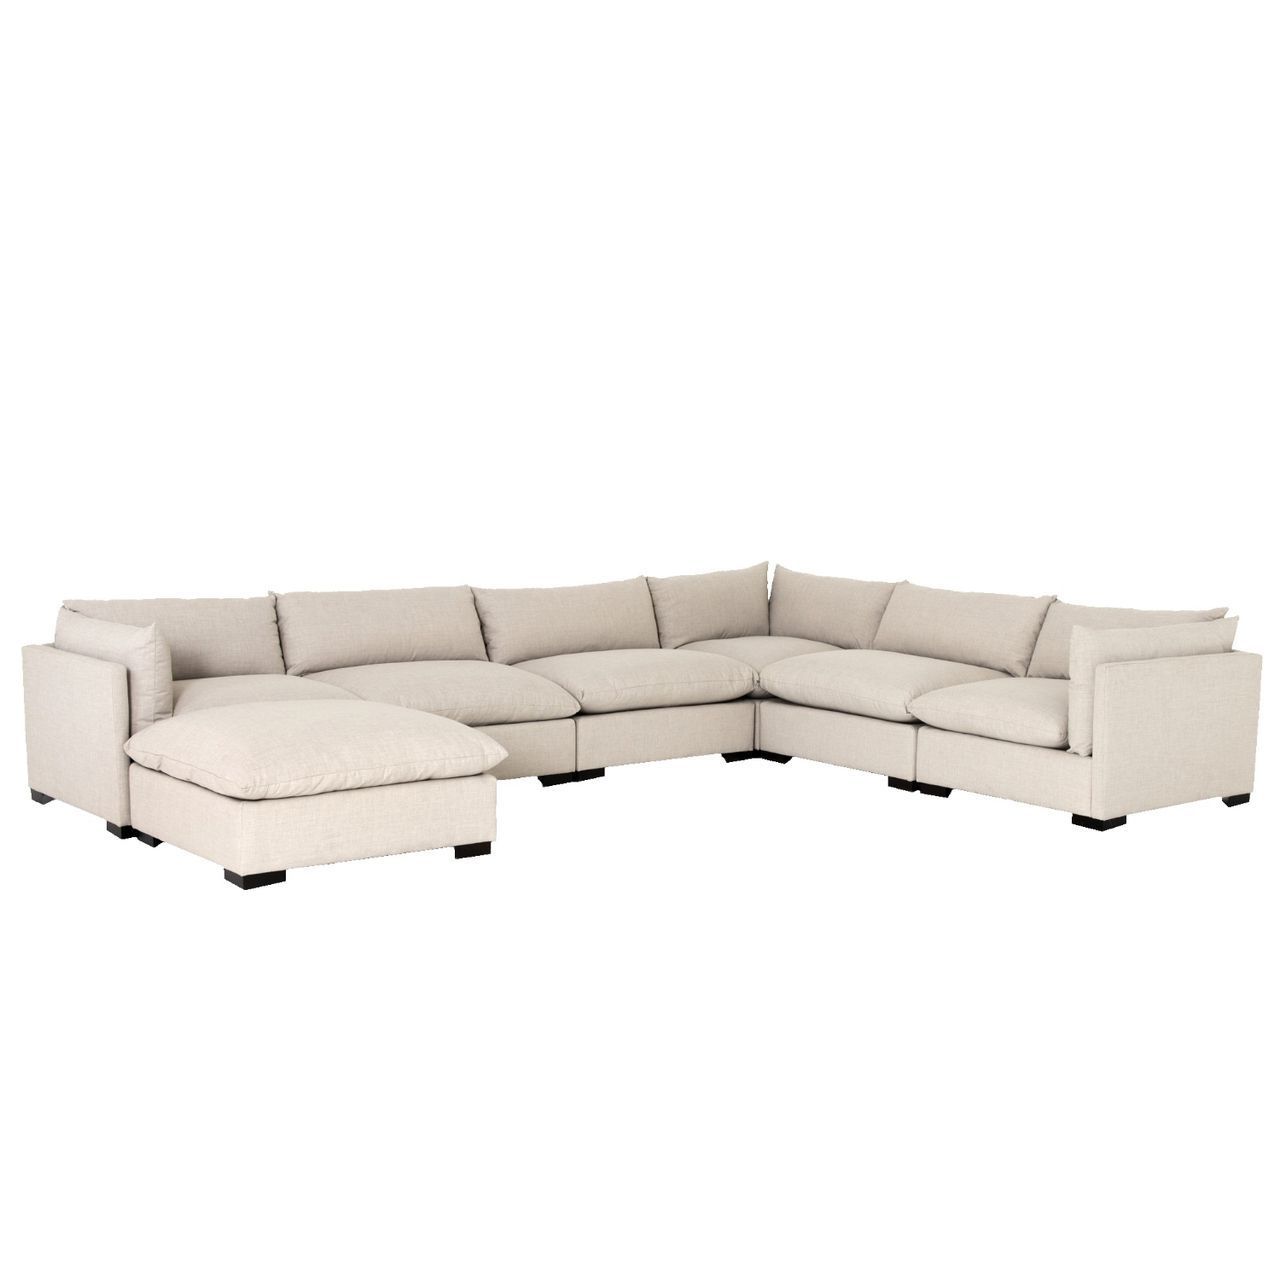 Westworld Modern Beige 7 Piece L Shape Sectional Sofa 156" | Sectional Pertaining To Beige L Shaped Sectional Sofas (View 11 of 20)